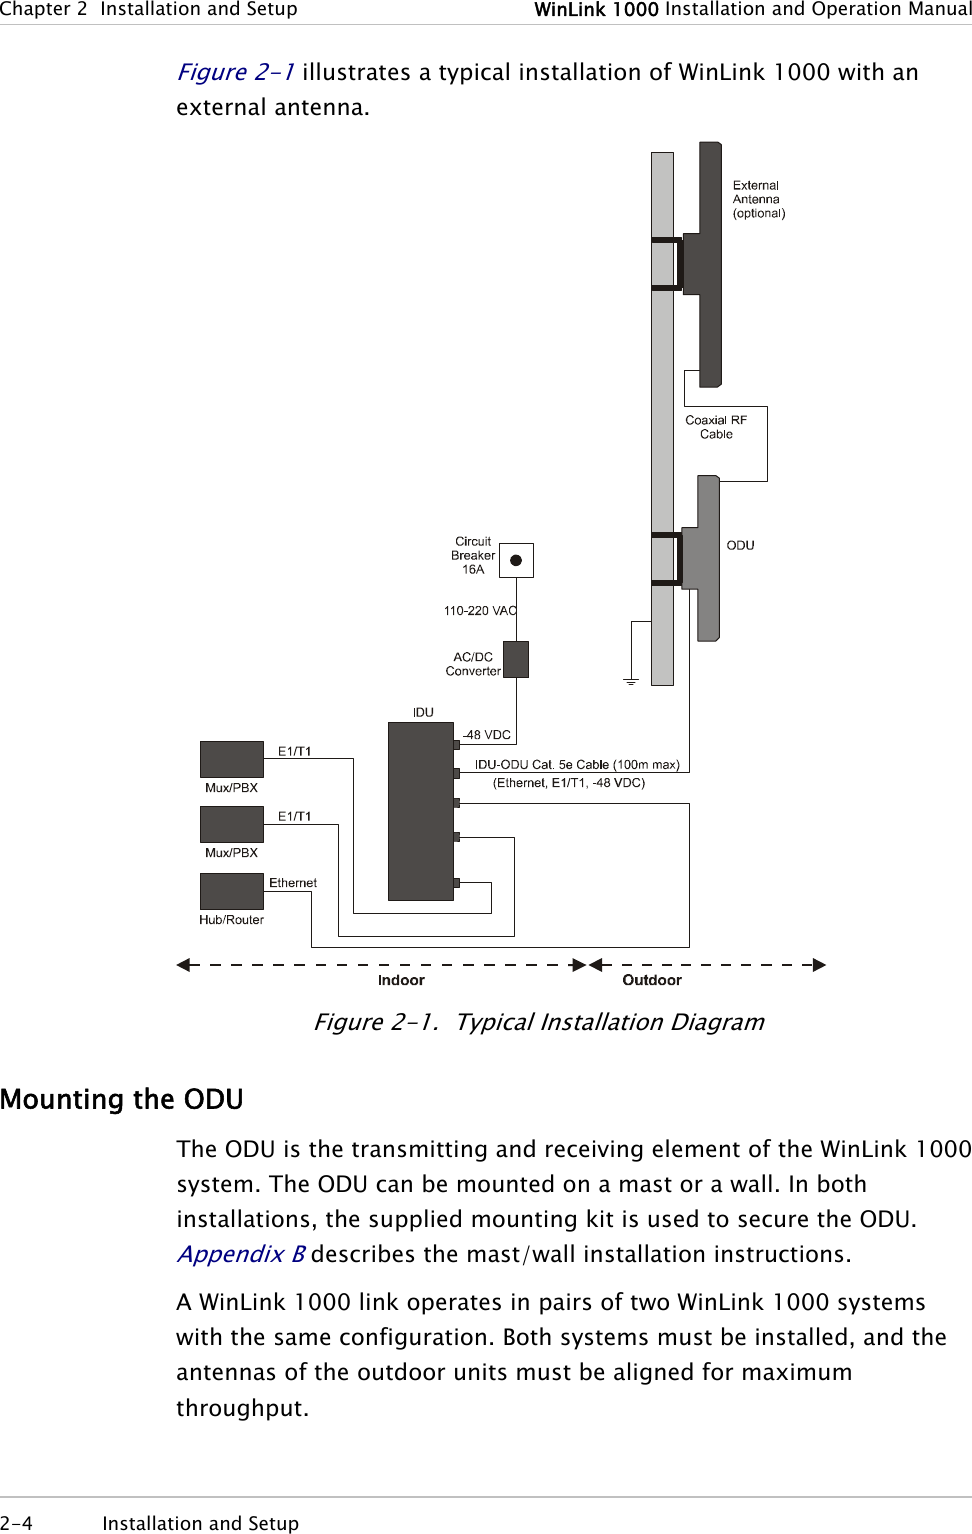 Chapter 2  Installation and Setup  WinLink 1000 Installation and Operation Manual 2-4  Installation and Setup  Figure 2-1 illustrates a typical installation of WinLink 1000 with an external antenna.  Figure 2-1.  Typical Installation Diagram Mounting the ODU The ODU is the transmitting and receiving element of the WinLink 1000 system. The ODU can be mounted on a mast or a wall. In both installations, the supplied mounting kit is used to secure the ODU. Appendix B describes the mast/wall installation instructions. A WinLink 1000 link operates in pairs of two WinLink 1000 systems with the same configuration. Both systems must be installed, and the antennas of the outdoor units must be aligned for maximum throughput. 